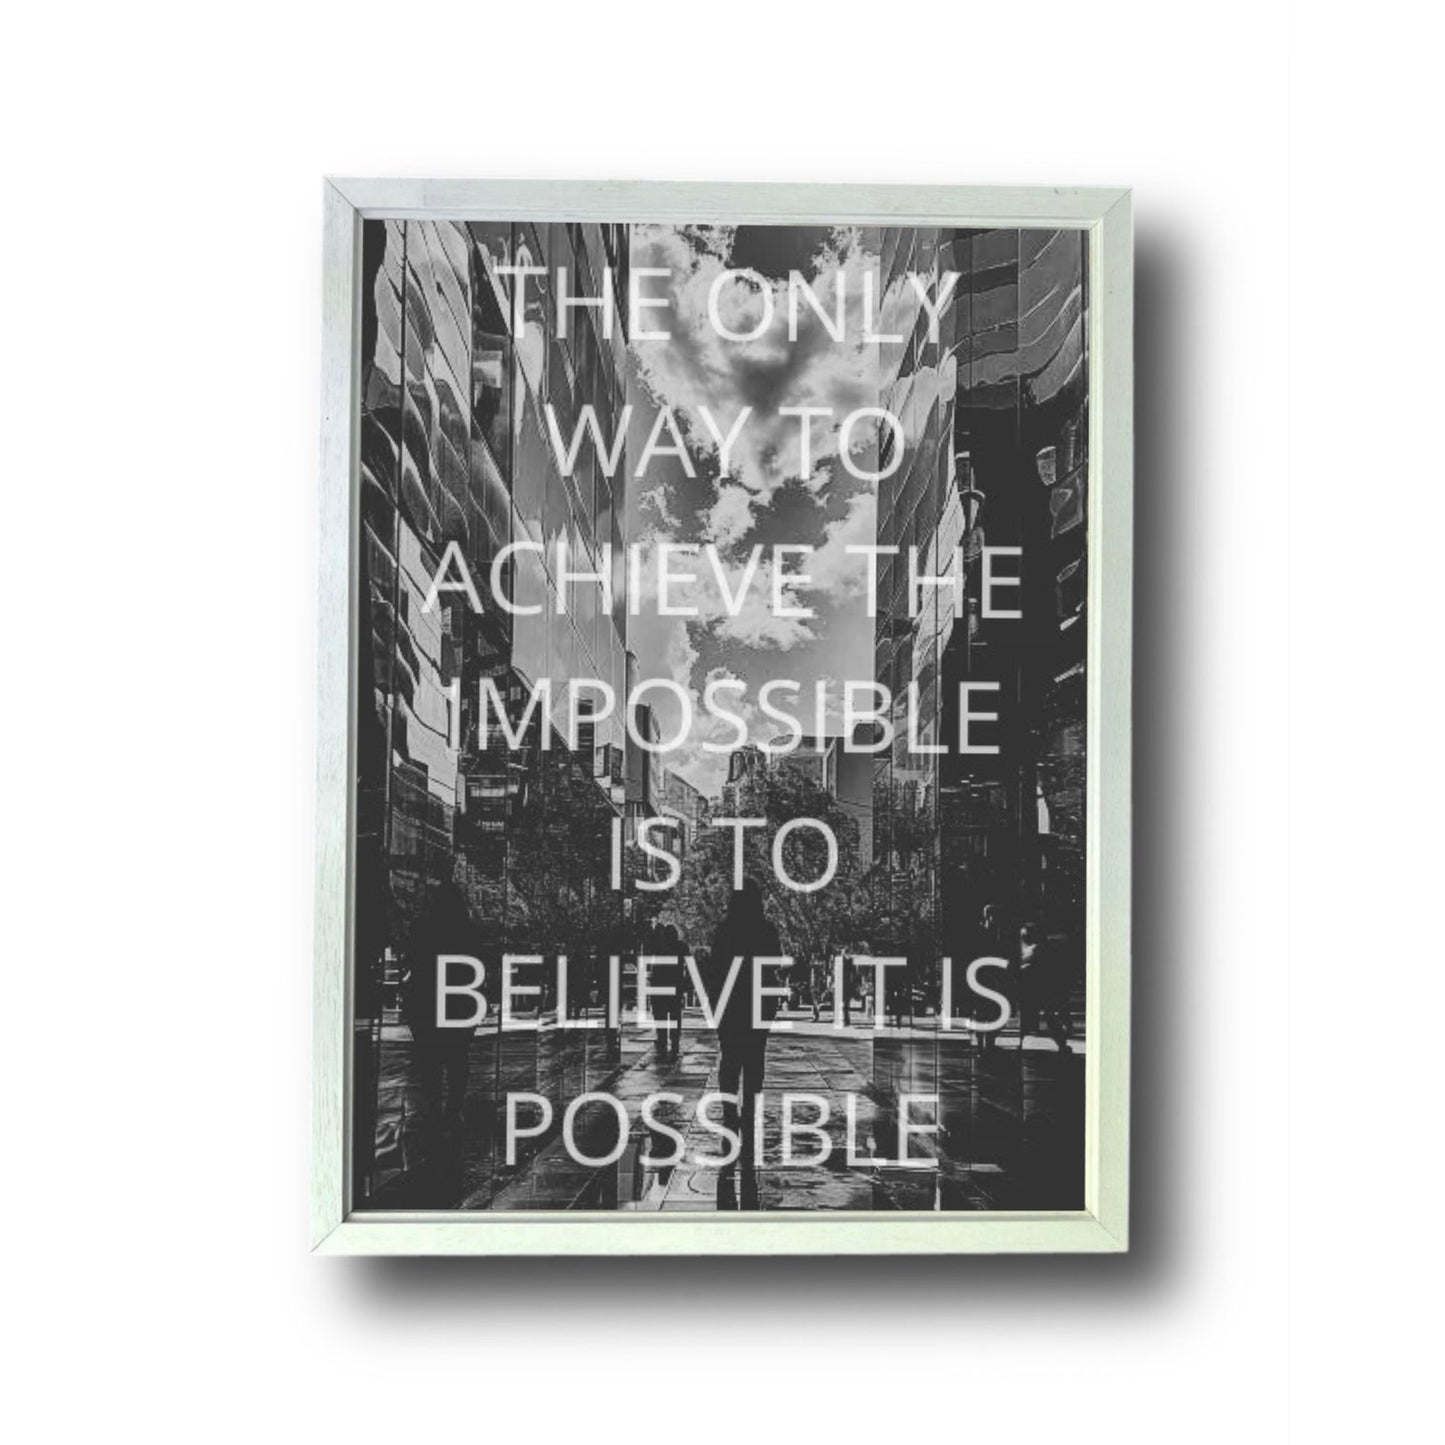 THE ONLY WAY TO ACHIEVE THE IMPOSSIBLE IS TO BELIEVE IT IS POSSIBLE